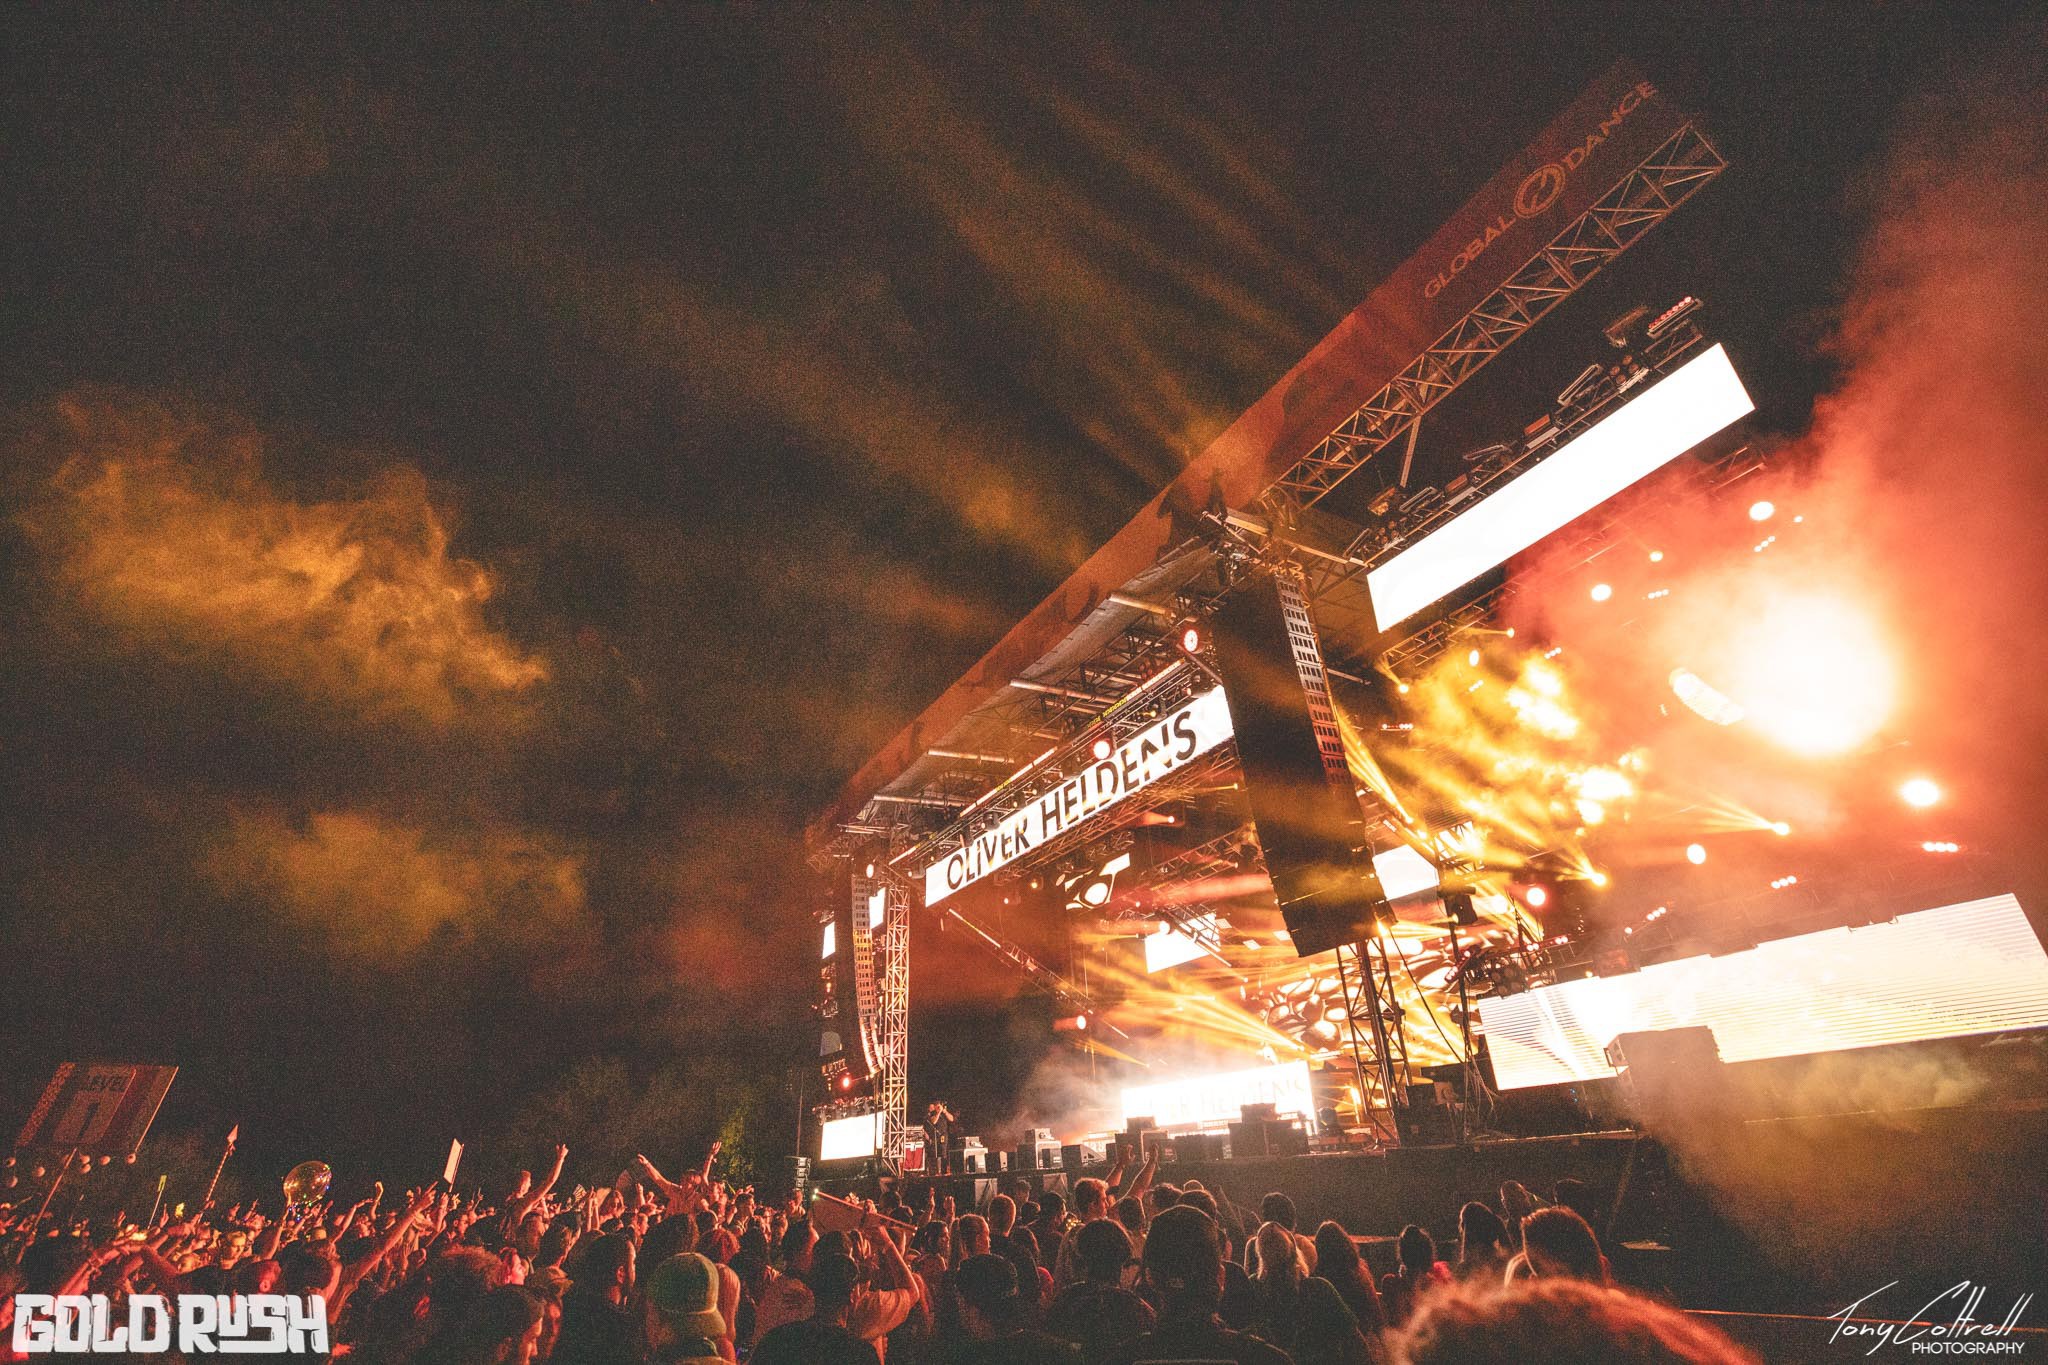 Goldrush Music Festival: A Weekend of Epic Musical Showdowns [Event Review]